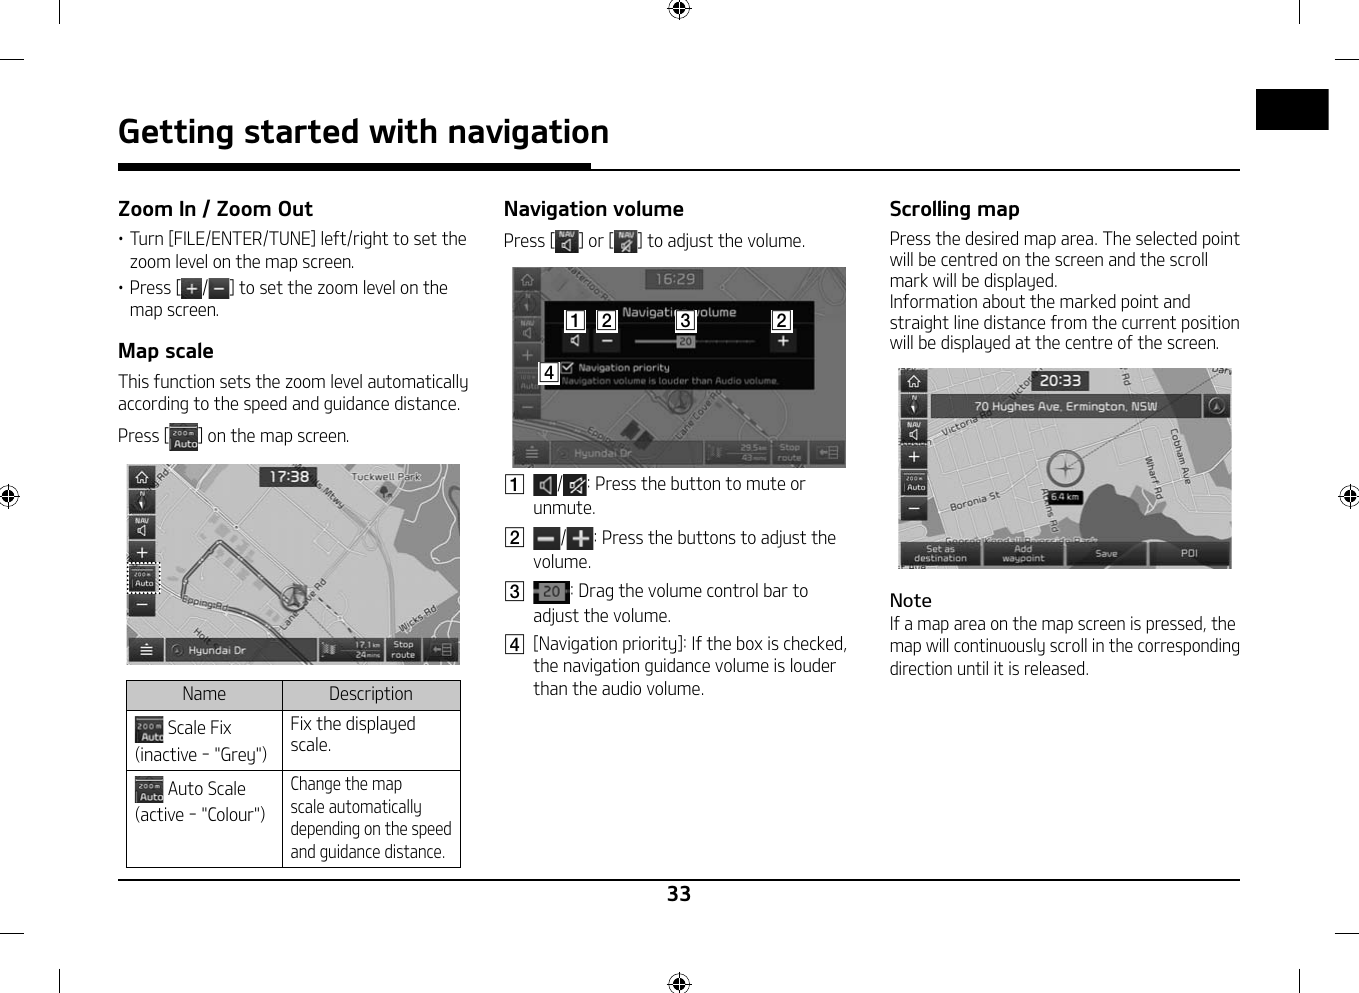 33Getting started with navigation Zoom In / Zoom Out䳜 Turn [FILE/ENTER/TUNE] left/right to set the zoom level on the map screen.䳜 Press [/] to set the zoom level on the map screen.Map scaleThis function sets the zoom level automatically according to the speed and guidance distance.Press [ ] on the map screen.Name Description Scale Fix (inactive - &quot;Grey&quot;)Fix the displayed scale. Auto Scale (active - &quot;Colour&quot;)Change the map scale automatically depending on the speed and guidance distance.Navigation volumePress [ ] or [ ] to adjust the volume.A CB BDA / : Press the button to mute or unmute.B  / : Press the buttons to adjust the volume.C  : Drag the volume control bar to adjust the volume.D  [Navigation priority]: If the box is checked, the navigation guidance volume is louder than the audio volume.Scrolling mapPress the desired map area. The selected point will be centred on the screen and the scroll mark will be displayed.Information about the marked point and straight line distance from the current position will be displayed at the centre of the screen.NoteIf a map area on the map screen is pressed, the map will continuously scroll in the corresponding direction until it is released. 